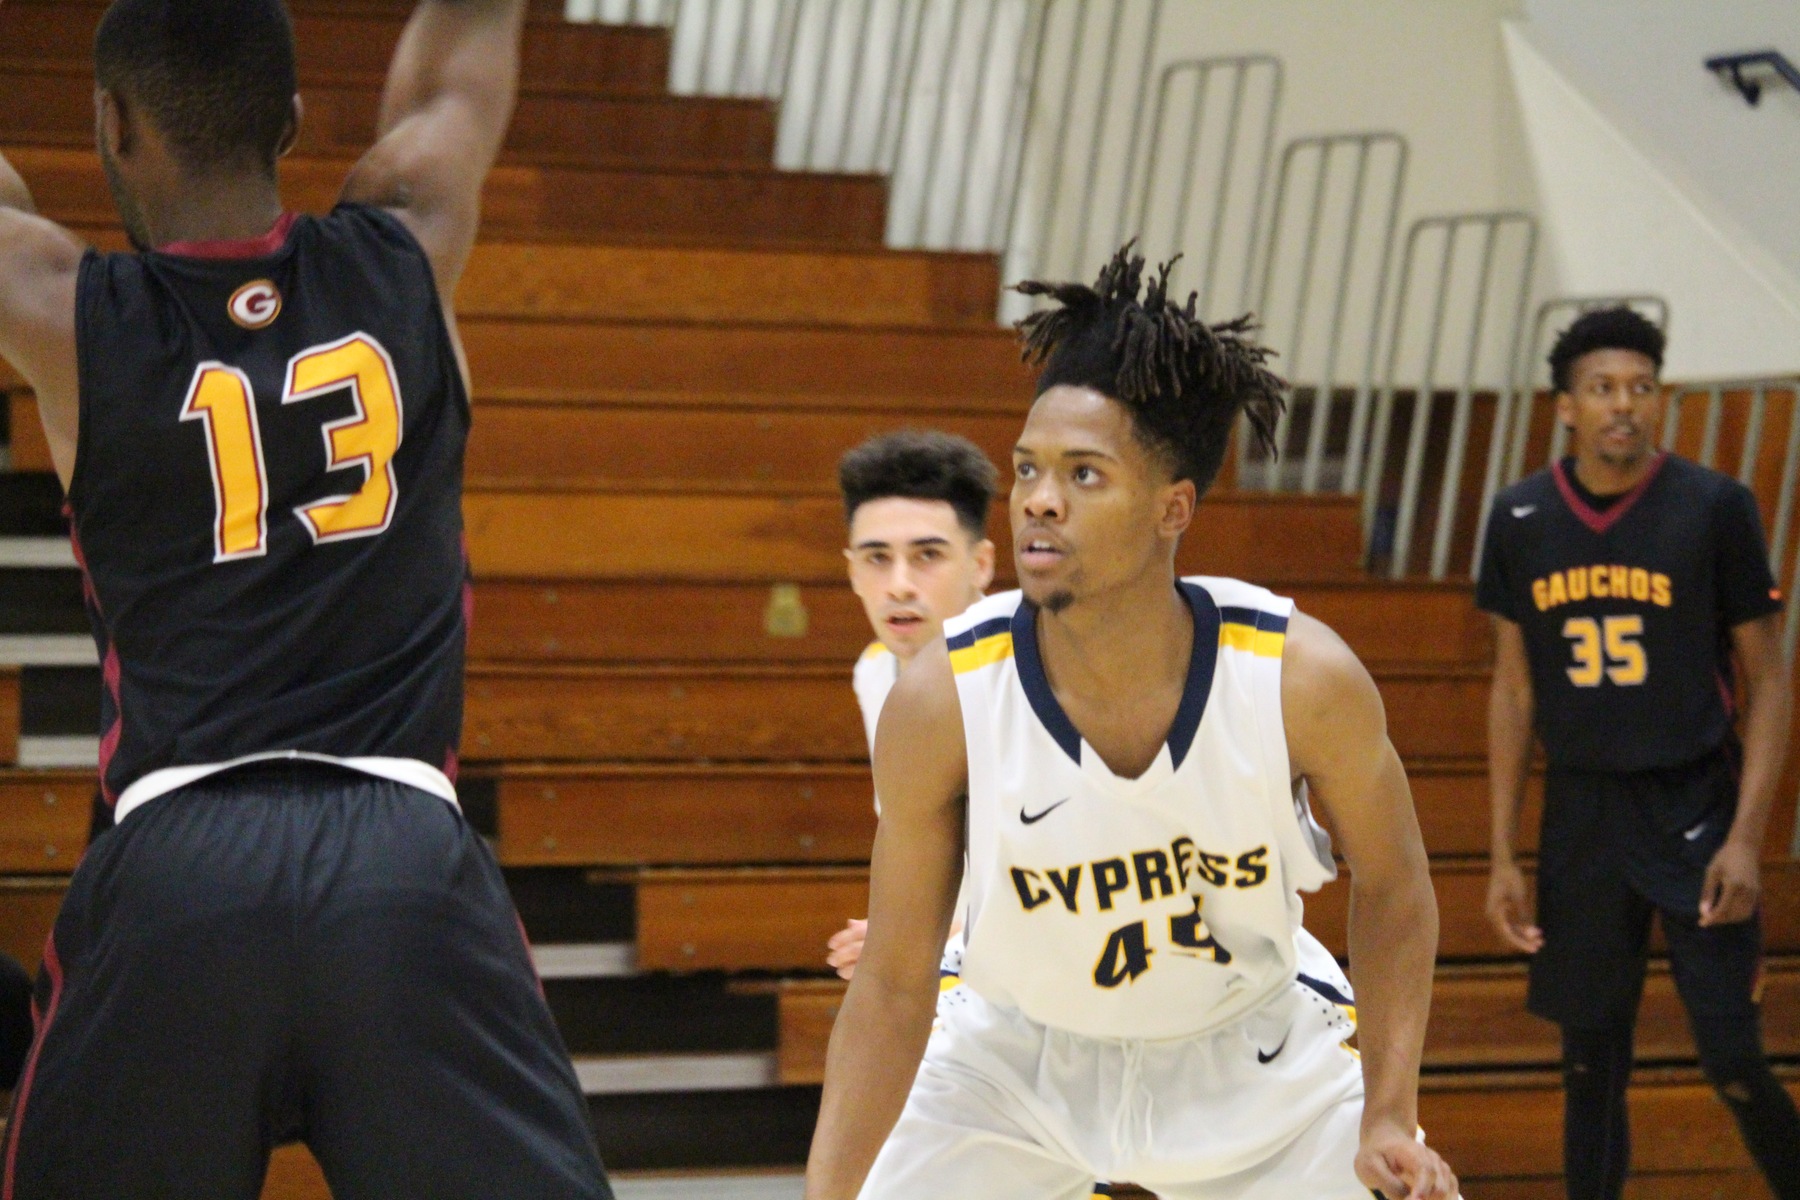 Cypress vs. Riverside- Chargers Set to Open CCCAA Playoffs on the Road